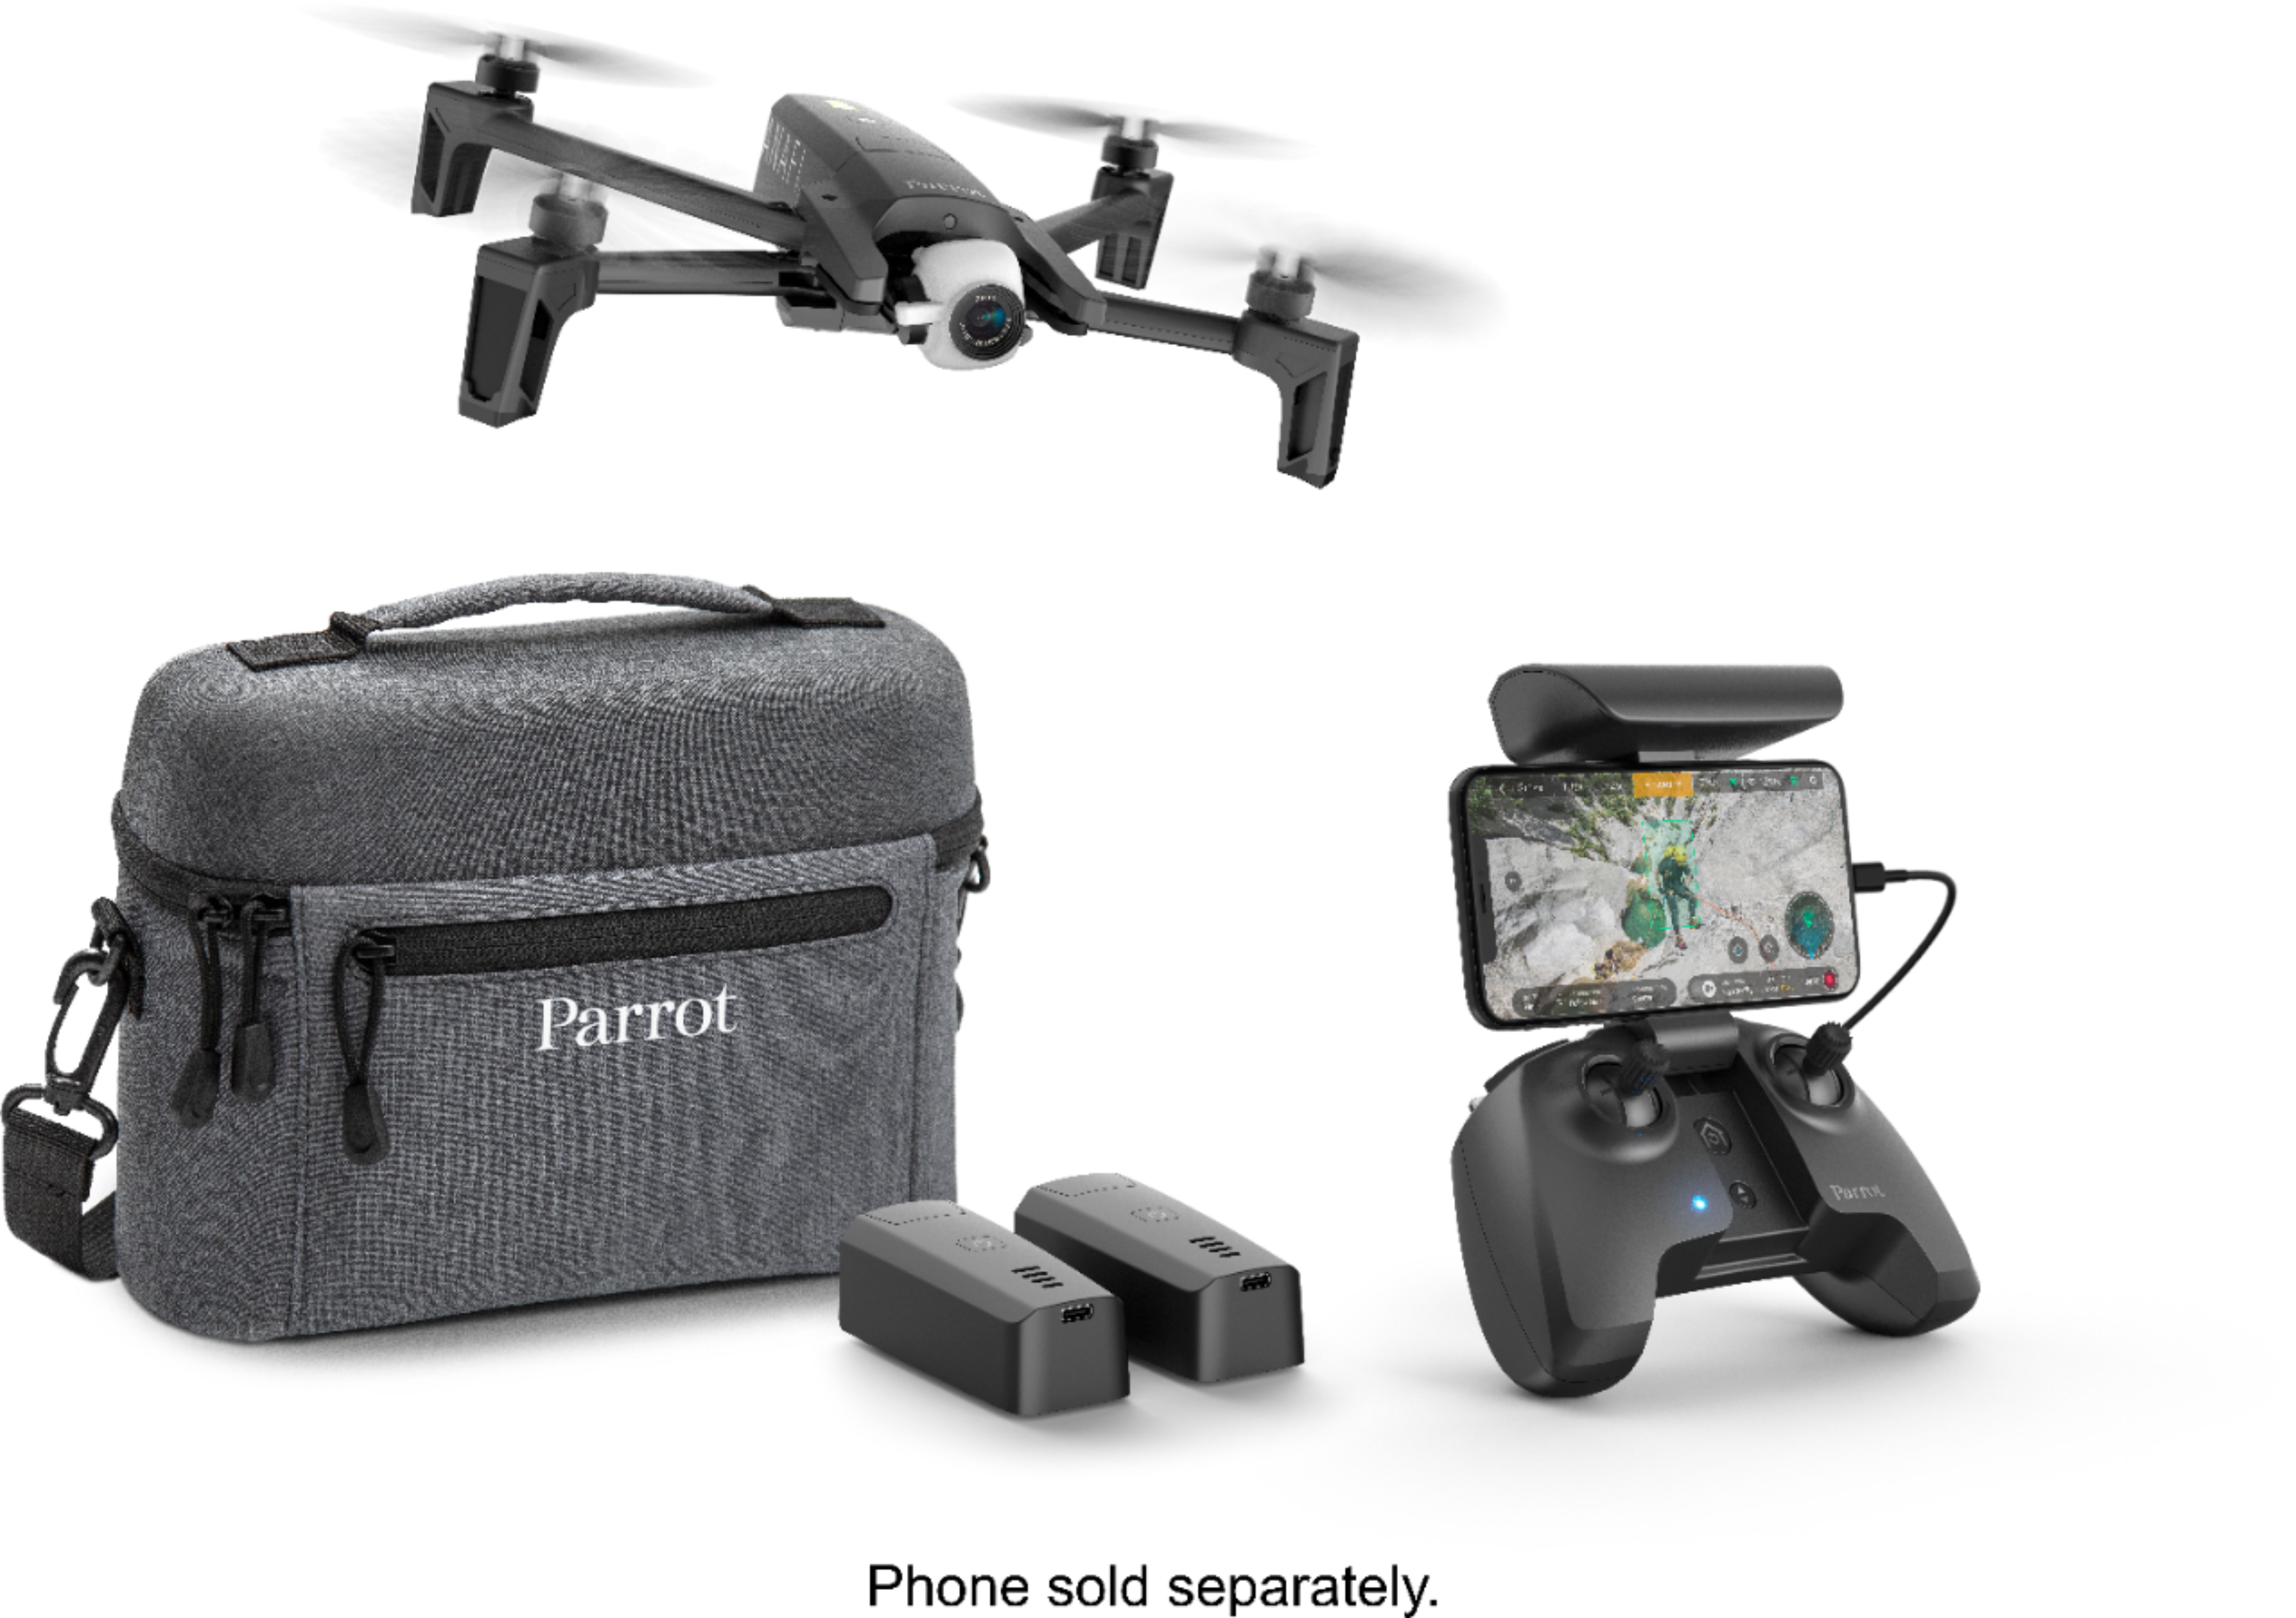 Fstoppers Reviews the Parrot Anafi Drone: The Good, the Bad, and